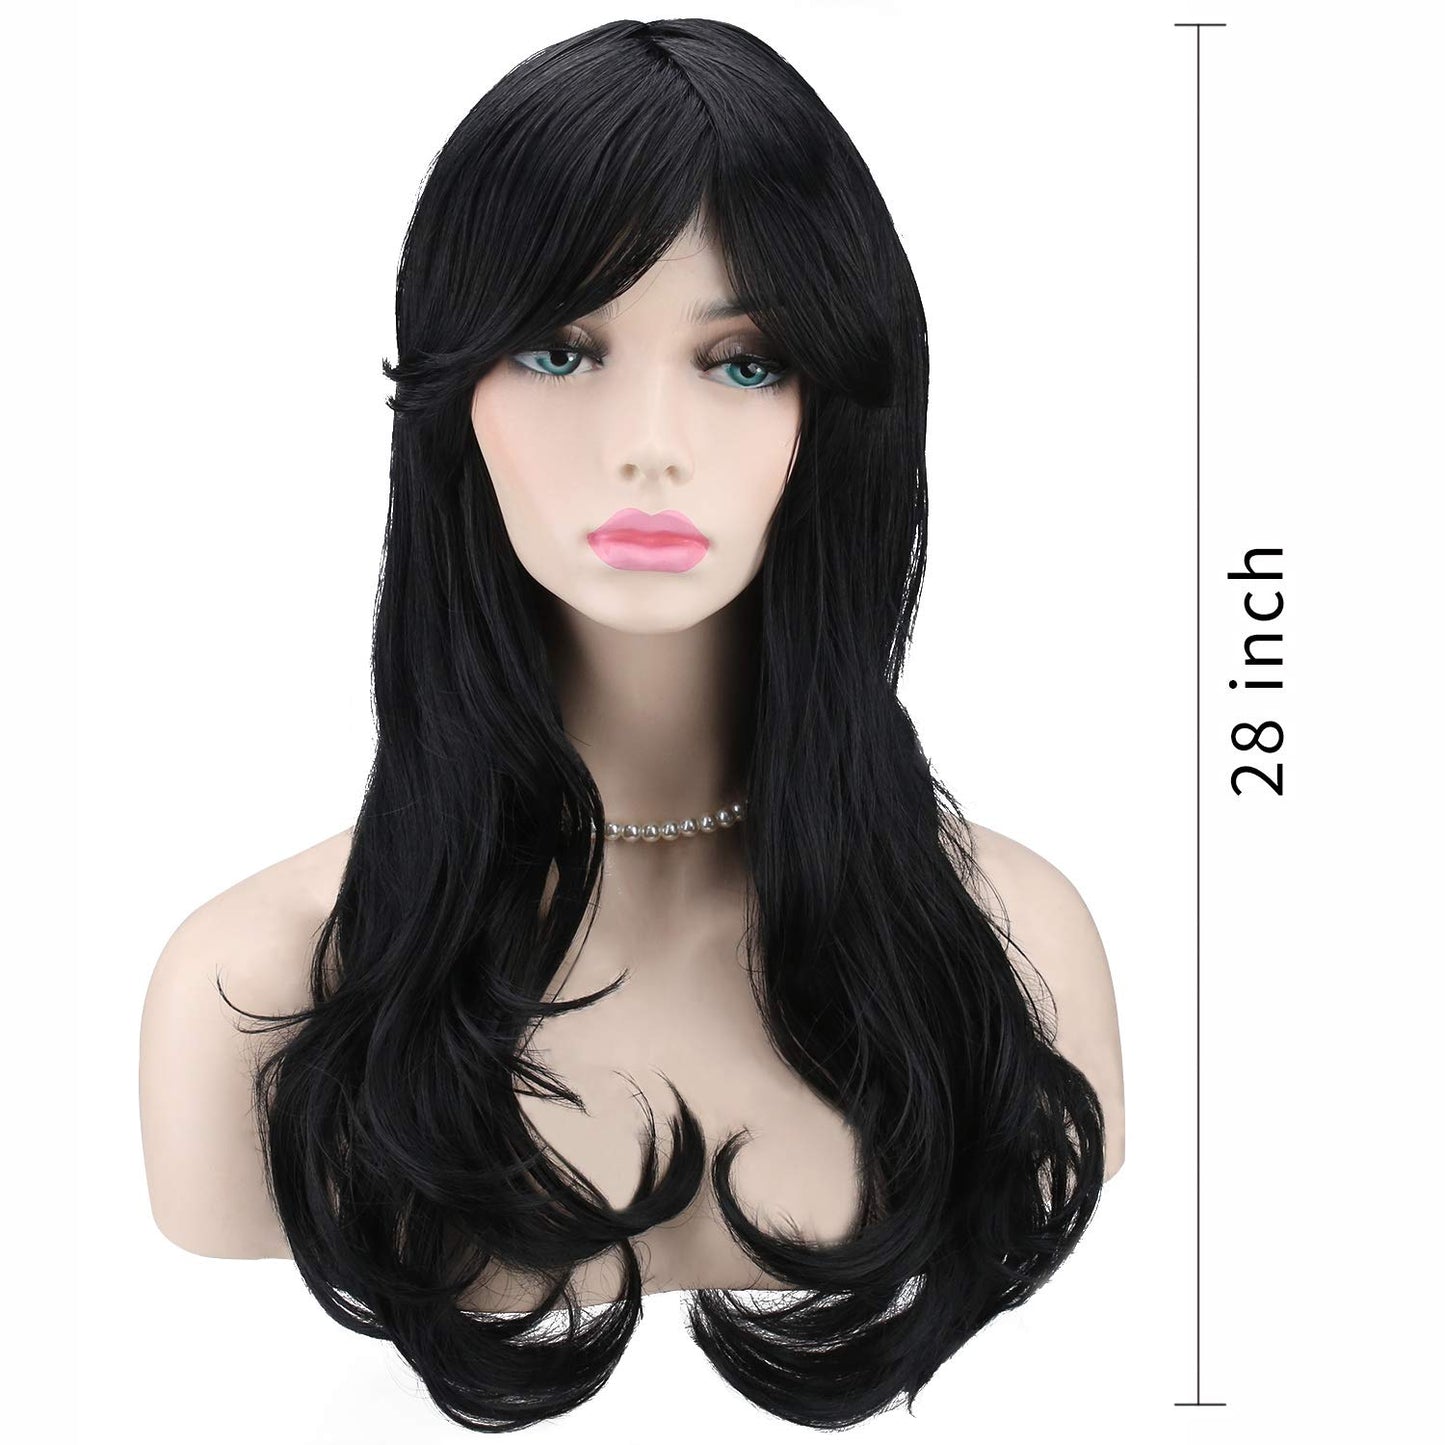 Lush Locks  Wavy Layered Women’s Heat Resistant 28-Inch 70cm Long Curly Hair Wig with Wig Cap, Black